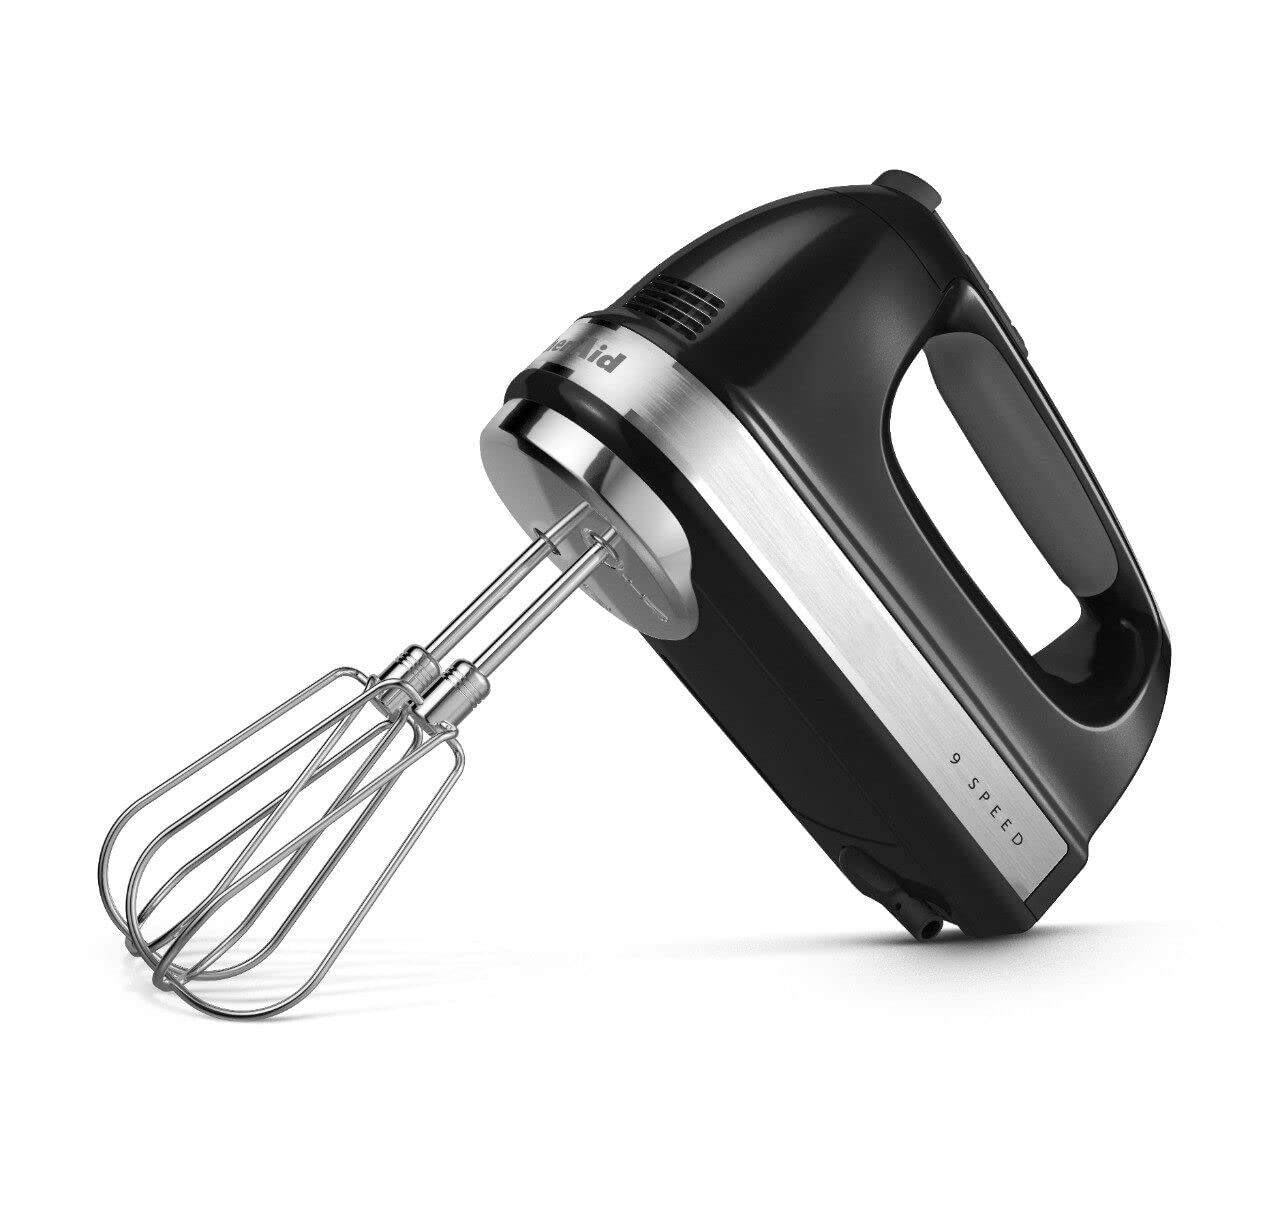 KitchenAid 9-Speed Digital Hand Mixer with Turbo Beater II Accessories and Pro Whisk - Onyx Black & KHMFEB2 Flex Edge Beater Accessory for Hand Mixer, One Size, Stainless Steel